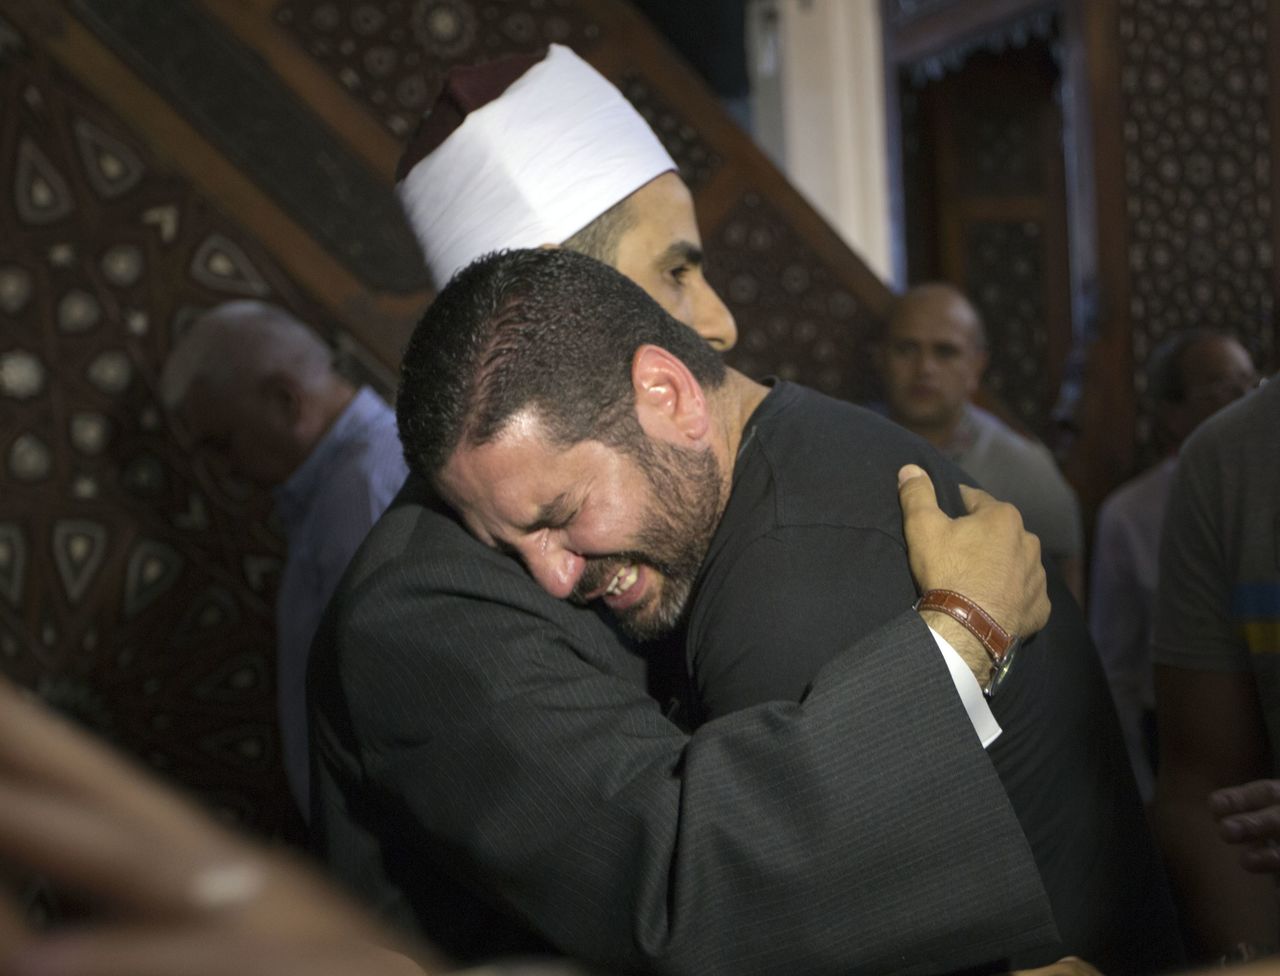 The Imam of al Thawrah Mosque in Cairo gives condolences to Osman Abu Laban on Friday. Laban lost four relatives in Thursday’s EgyptAir plane crash.